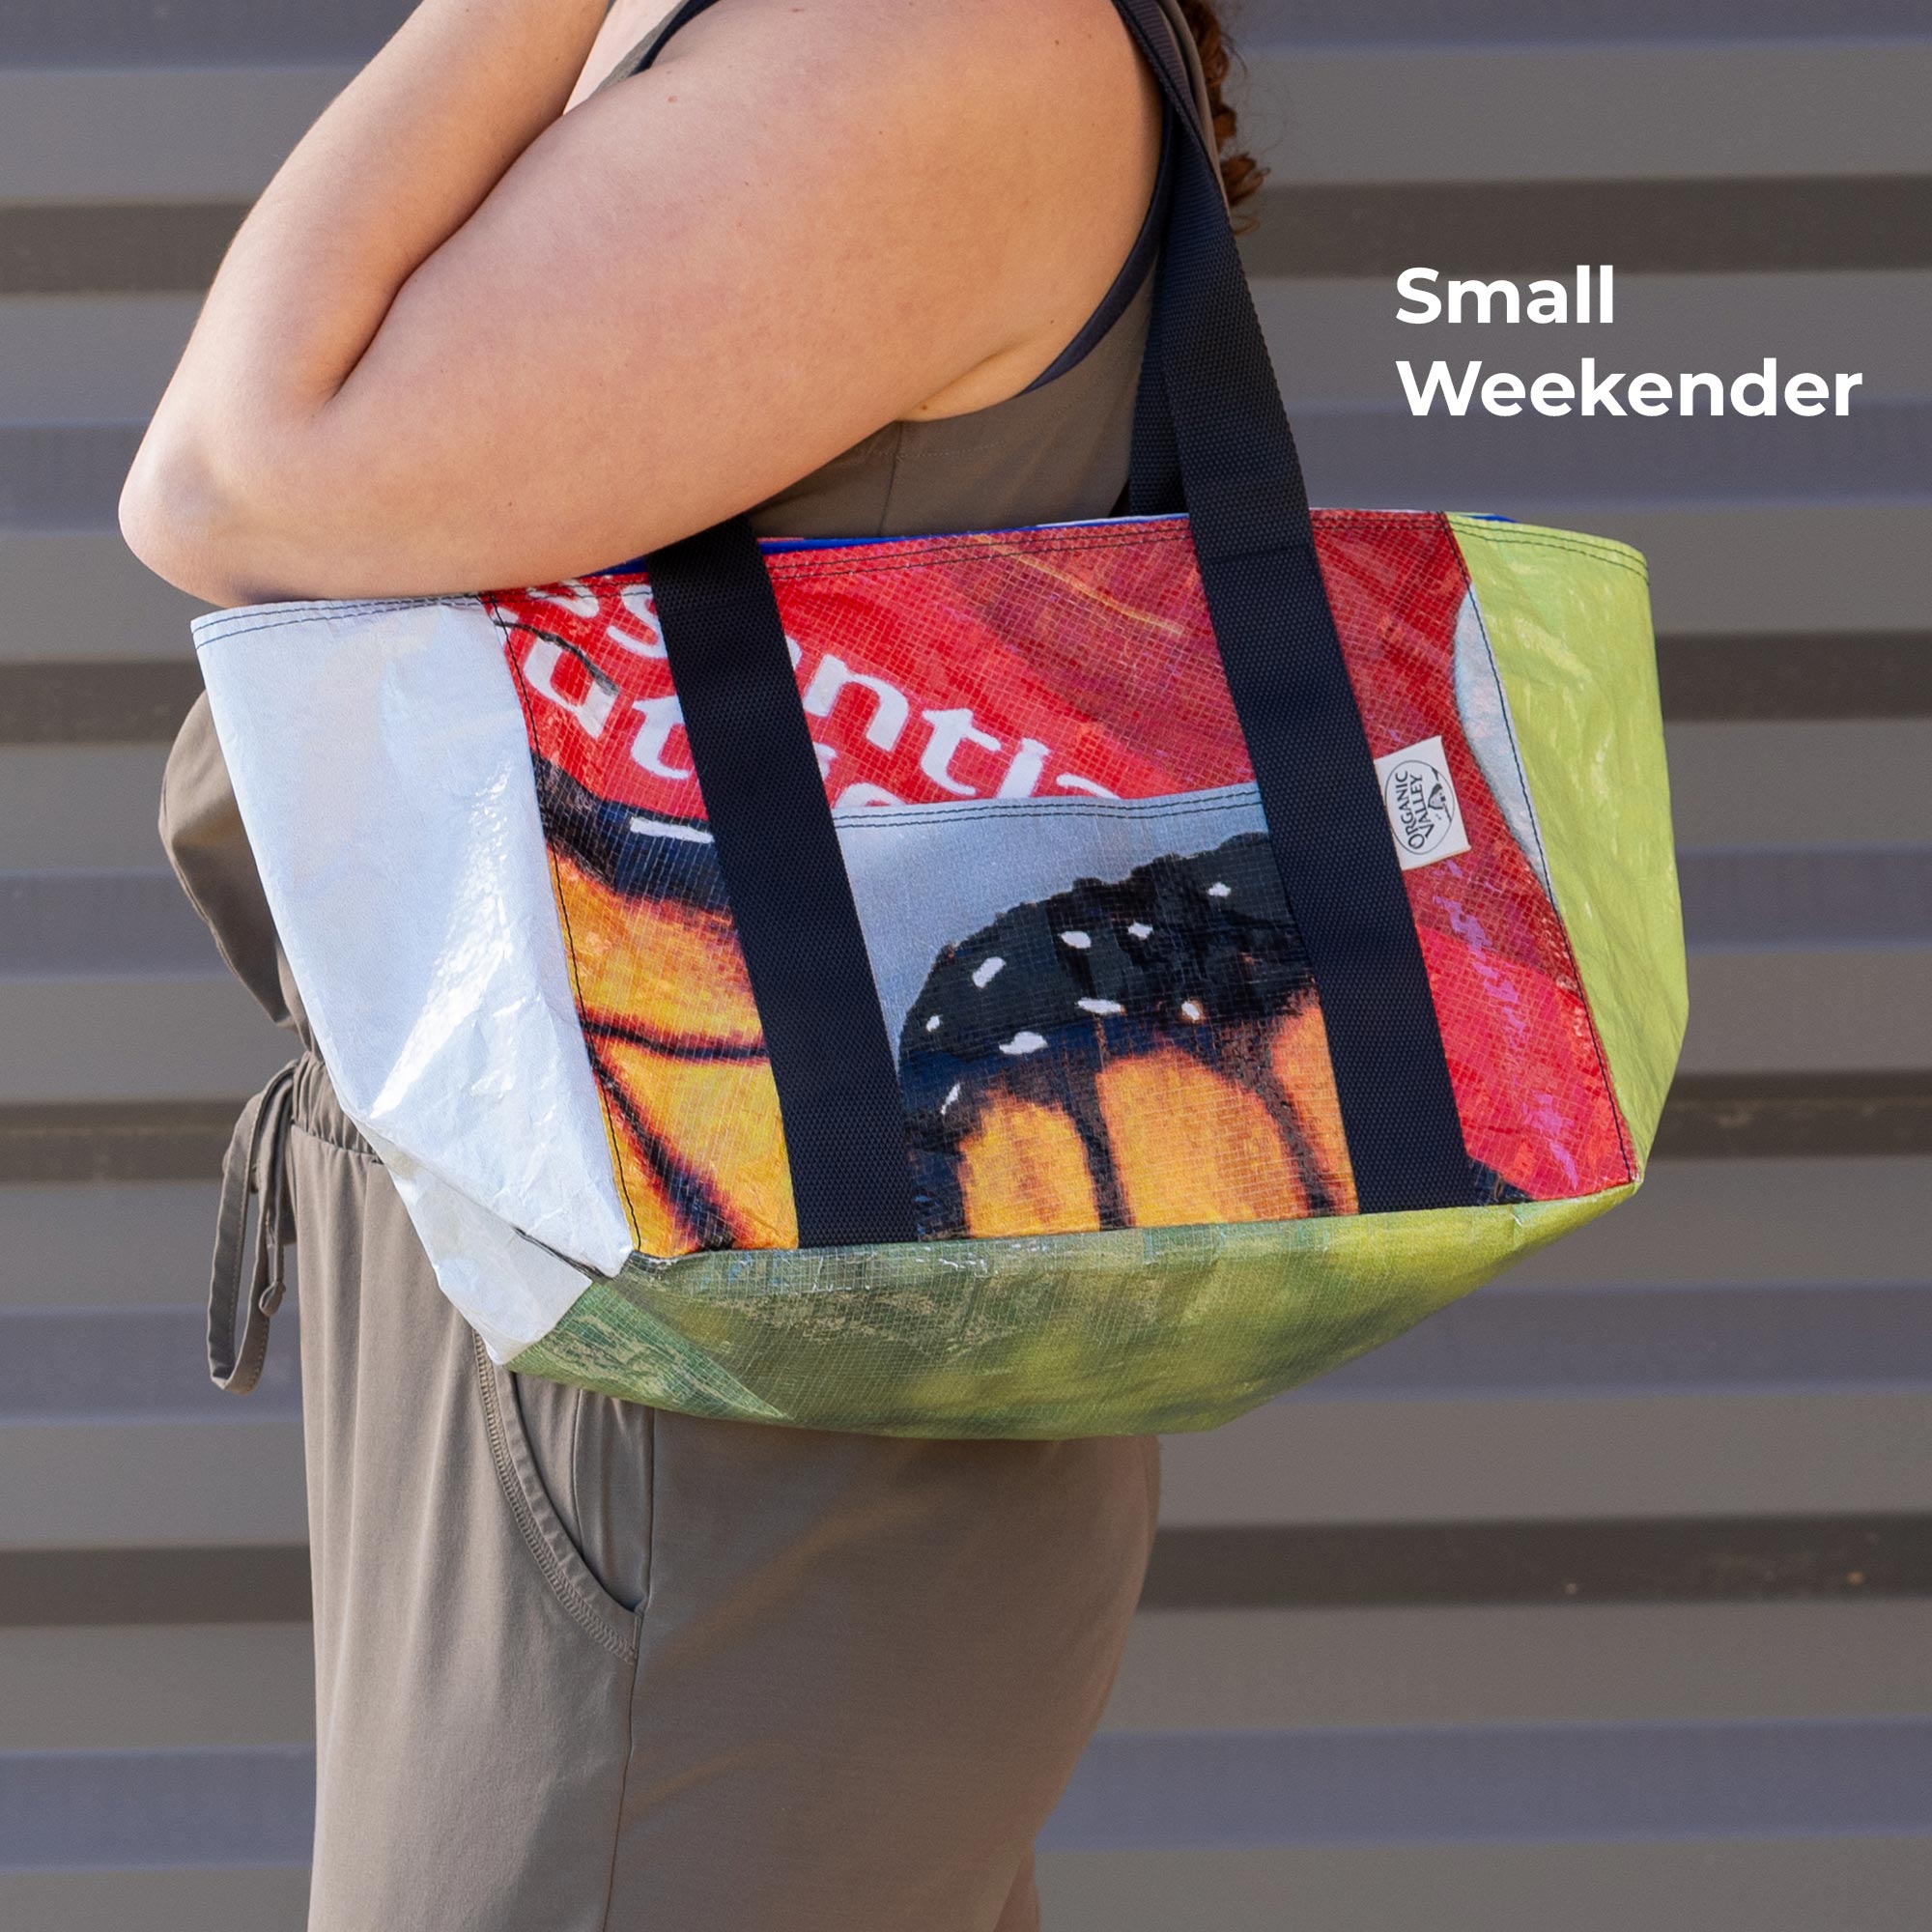 Upcycled Weekender in Bold Prints color